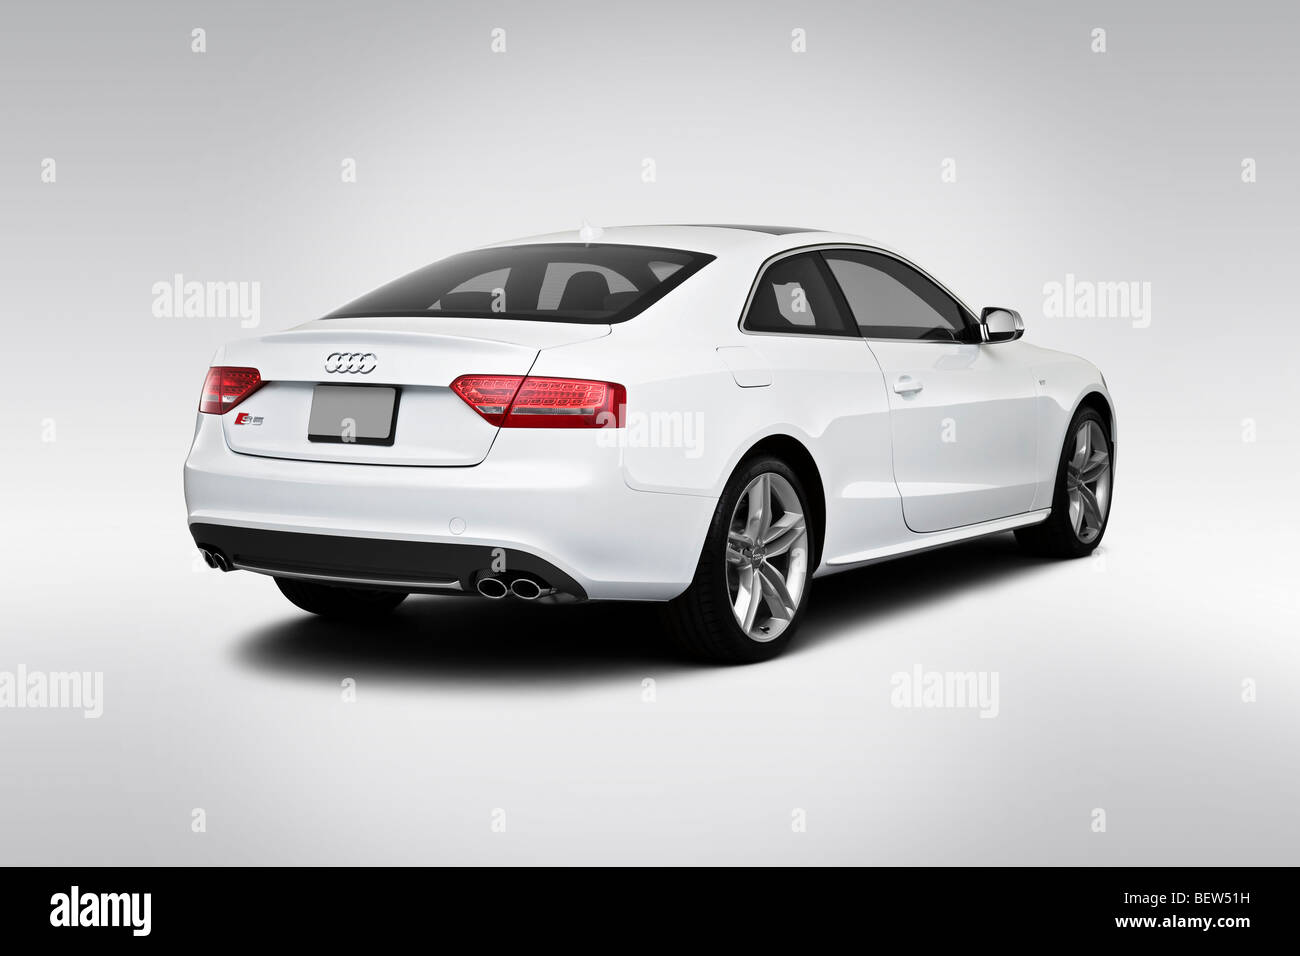 10 Audi S5 In White Rear Angle View Stock Photo Alamy